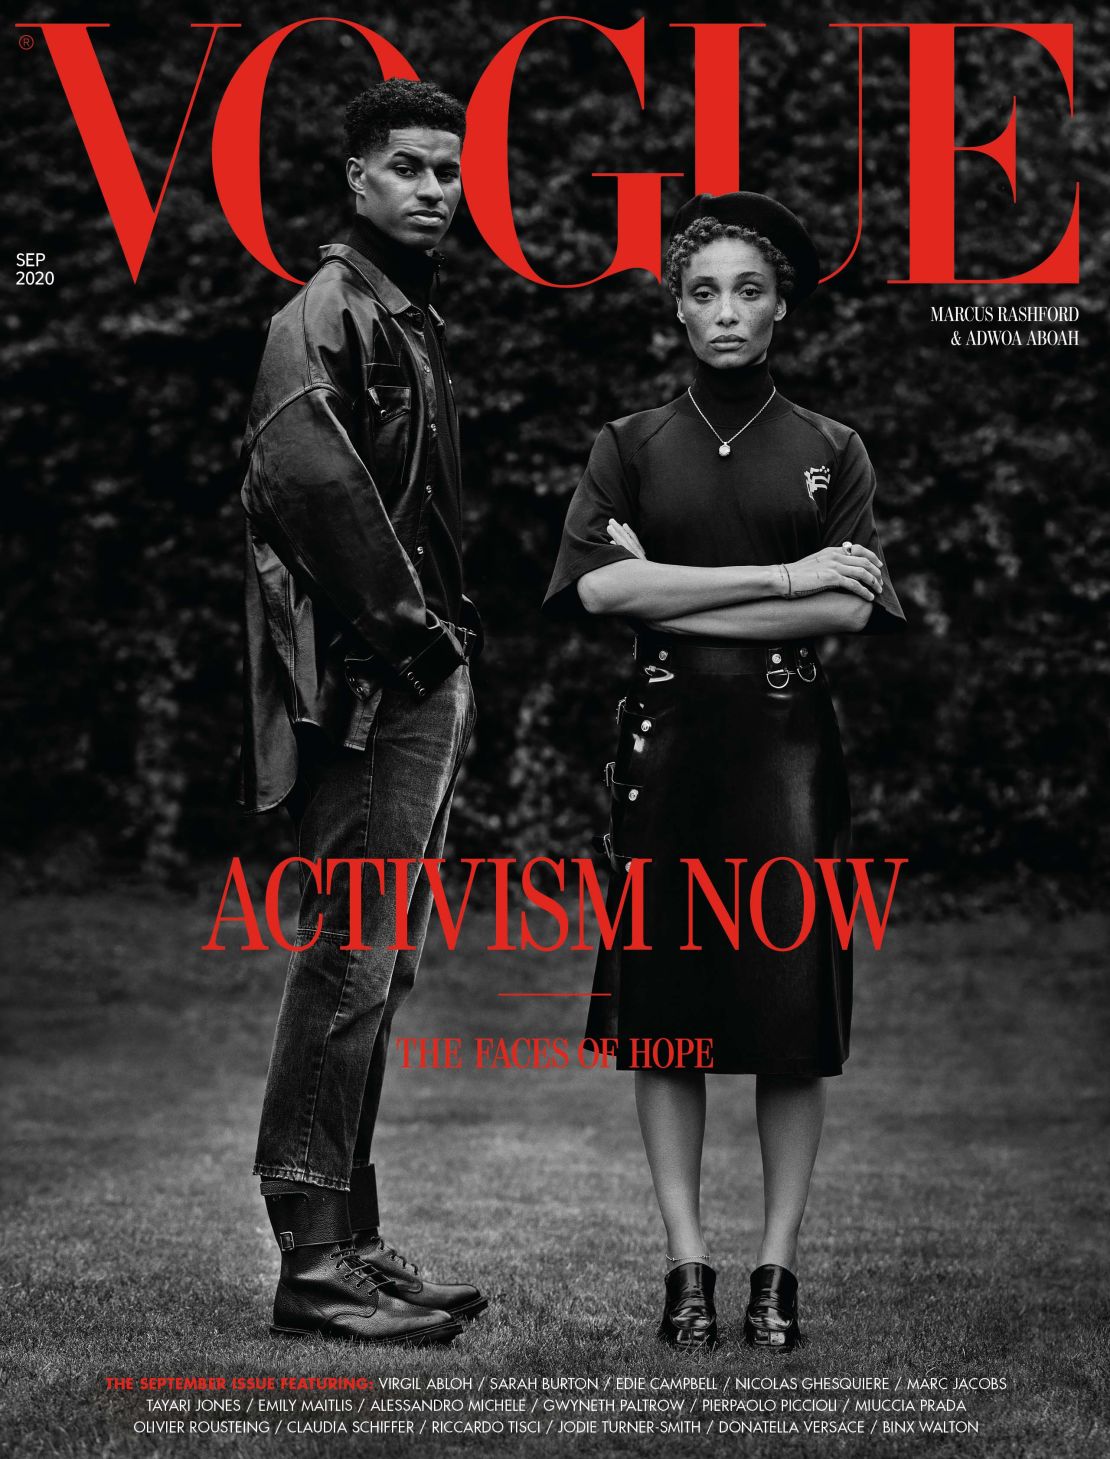 Footballer Marcus Rashford and model and activist Adwoa Aboah on the cover of this year's September issue of British Vogue